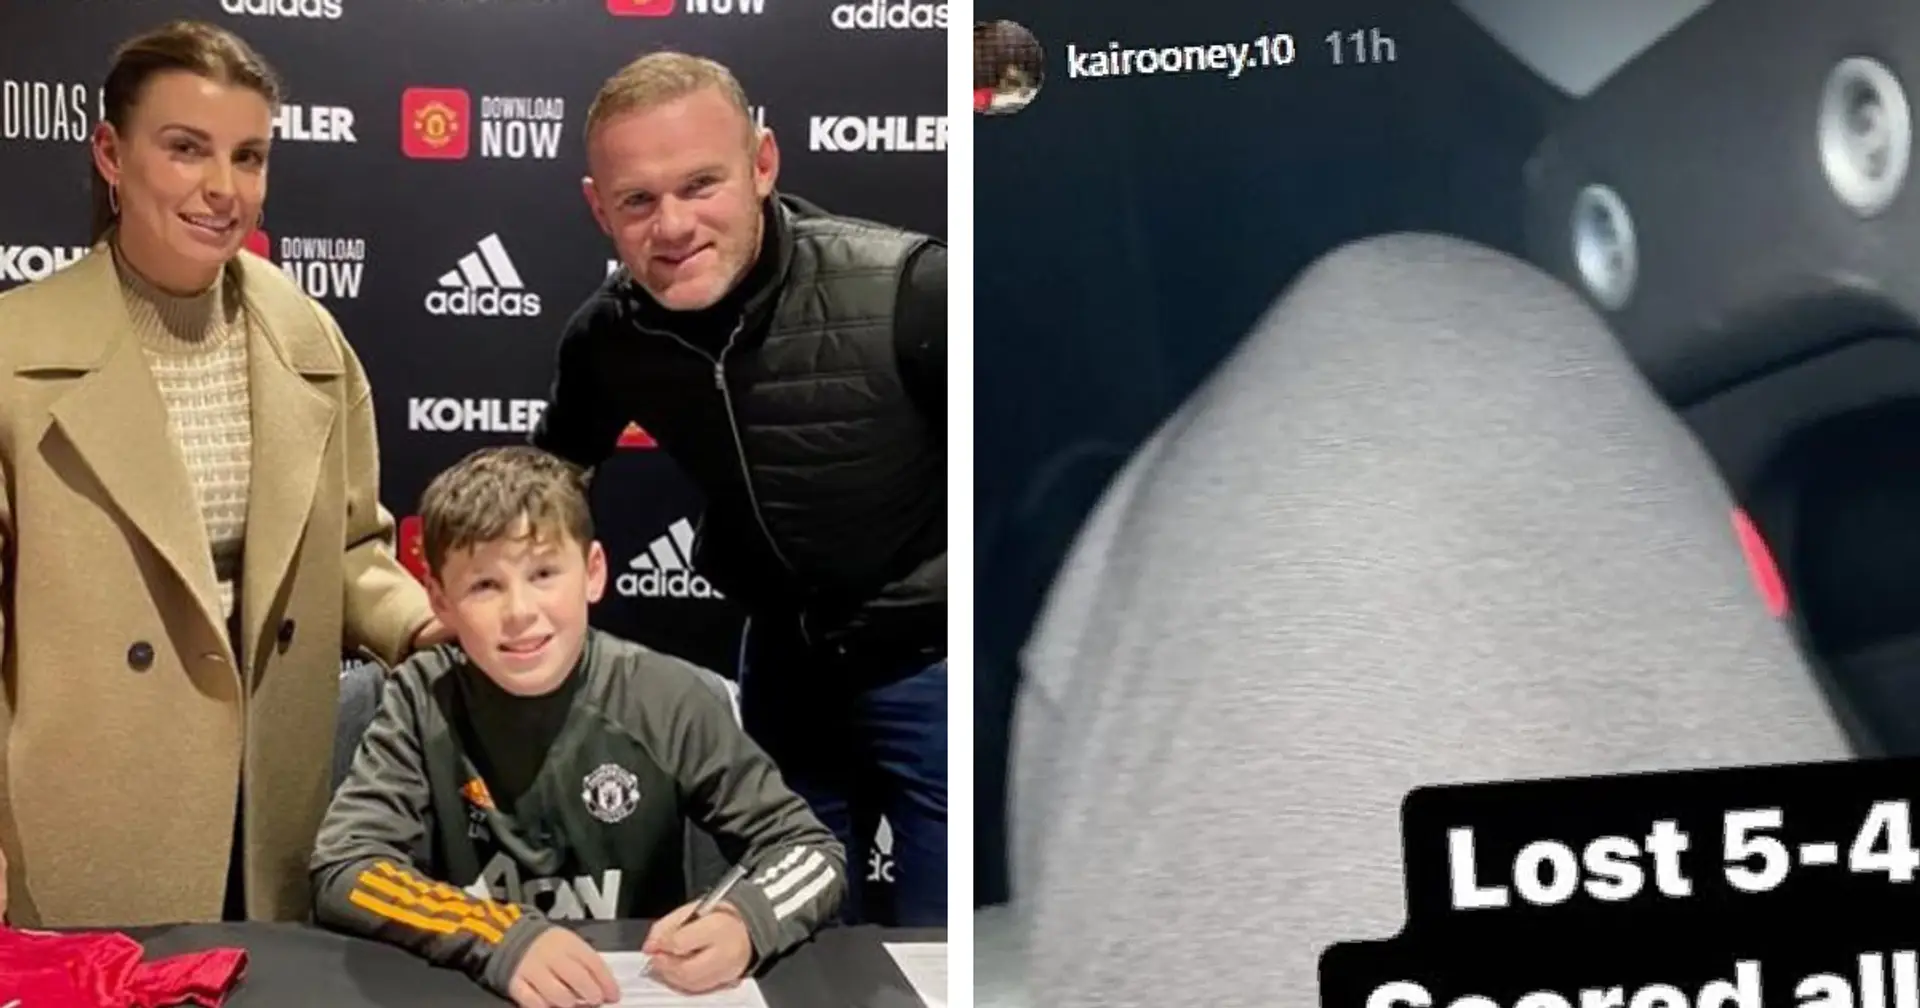 Like father, like son: Kai Rooney scores all goals for Man United in 5-4 loss to Liverpool